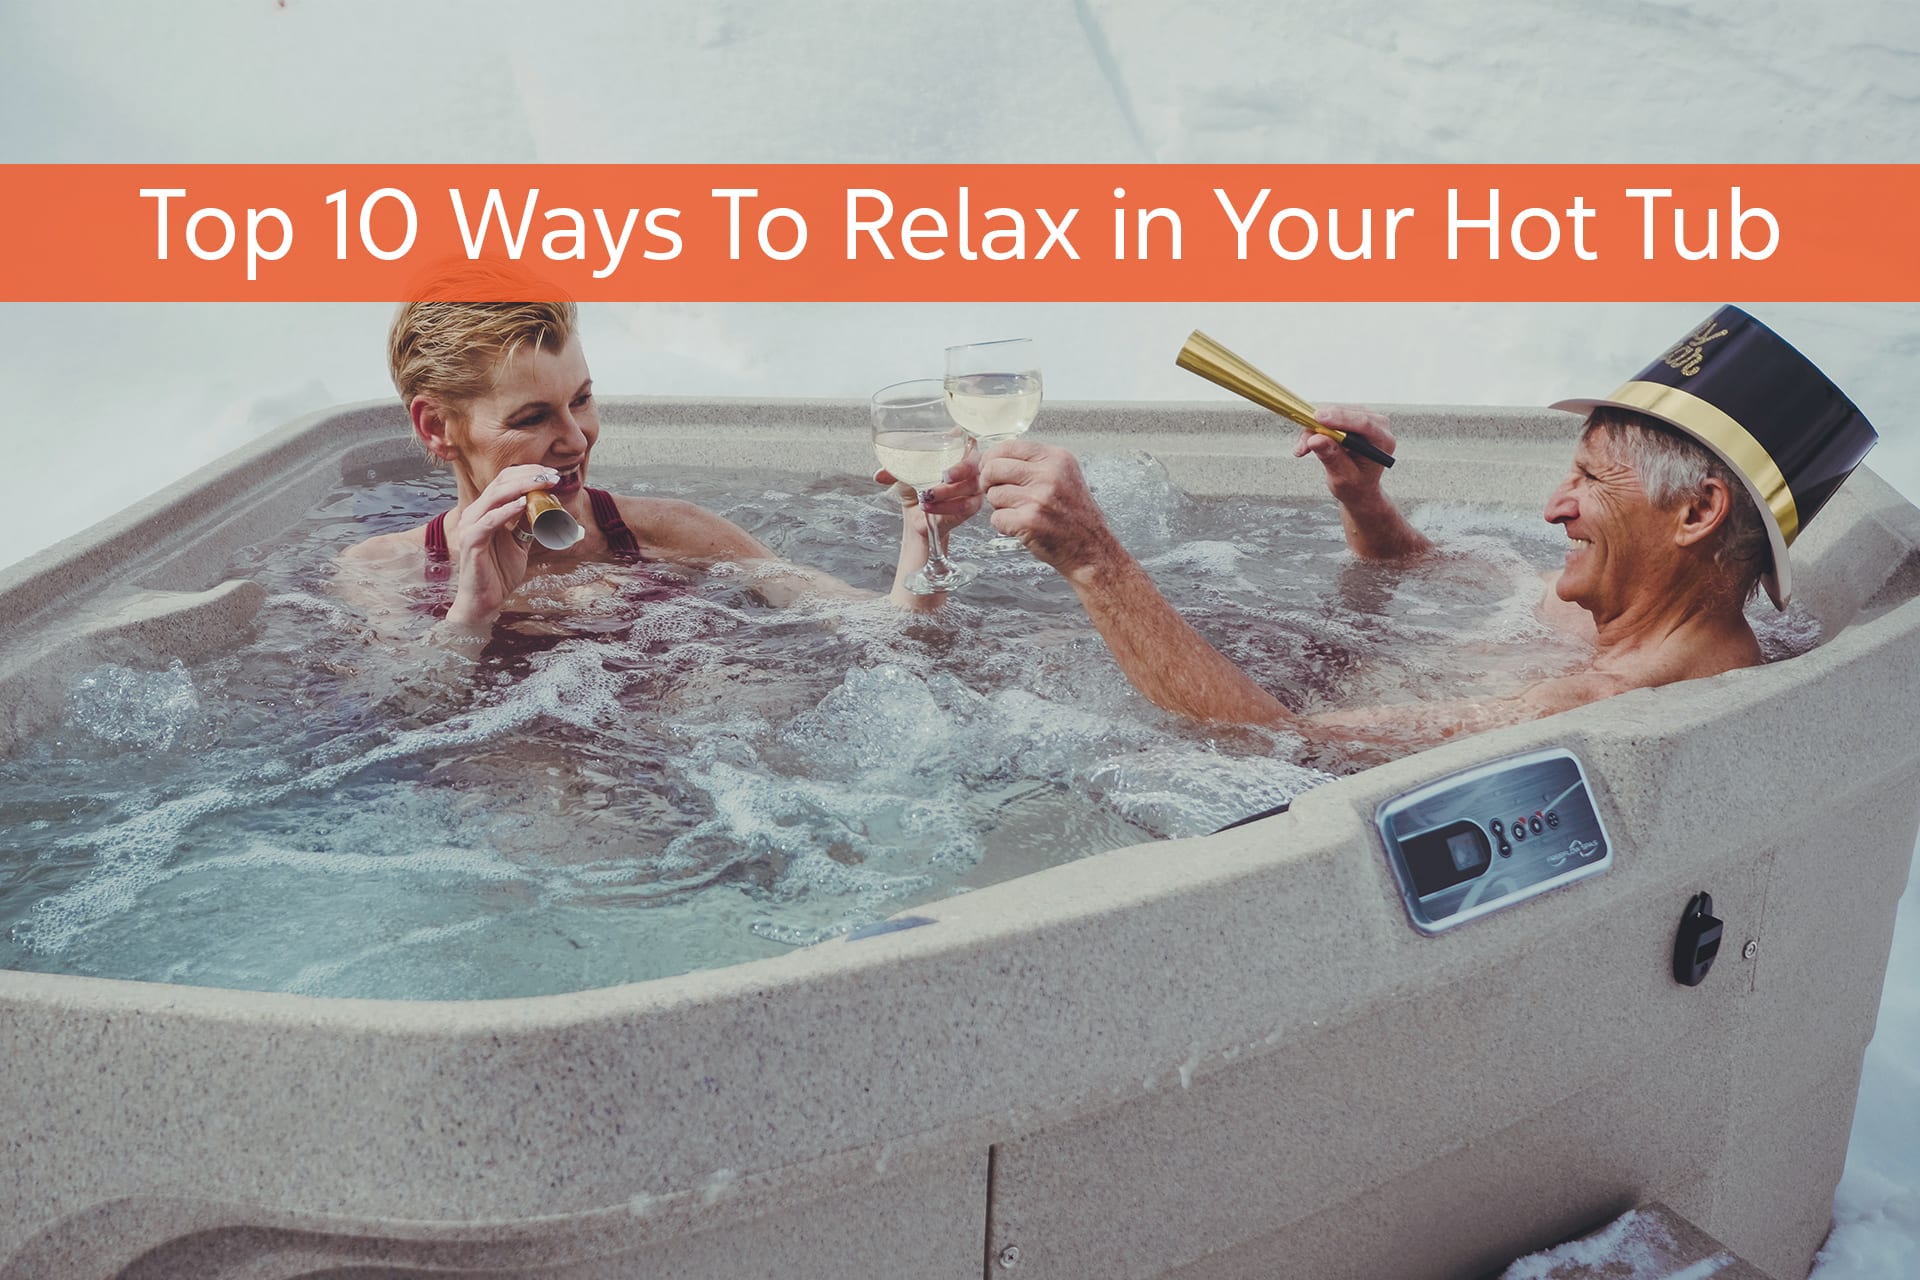 Top 10 Ways to Relax in Your Hot Tub